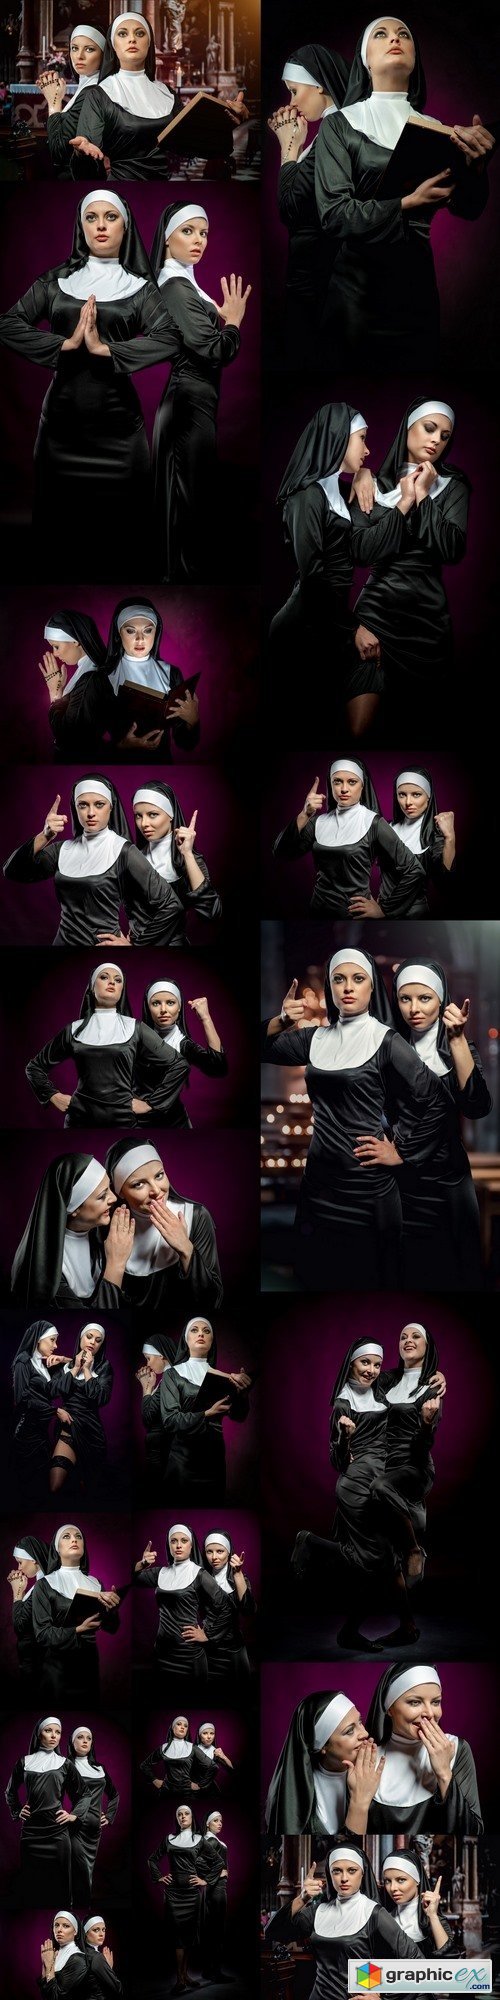 Two attractive young nuns posing indoors